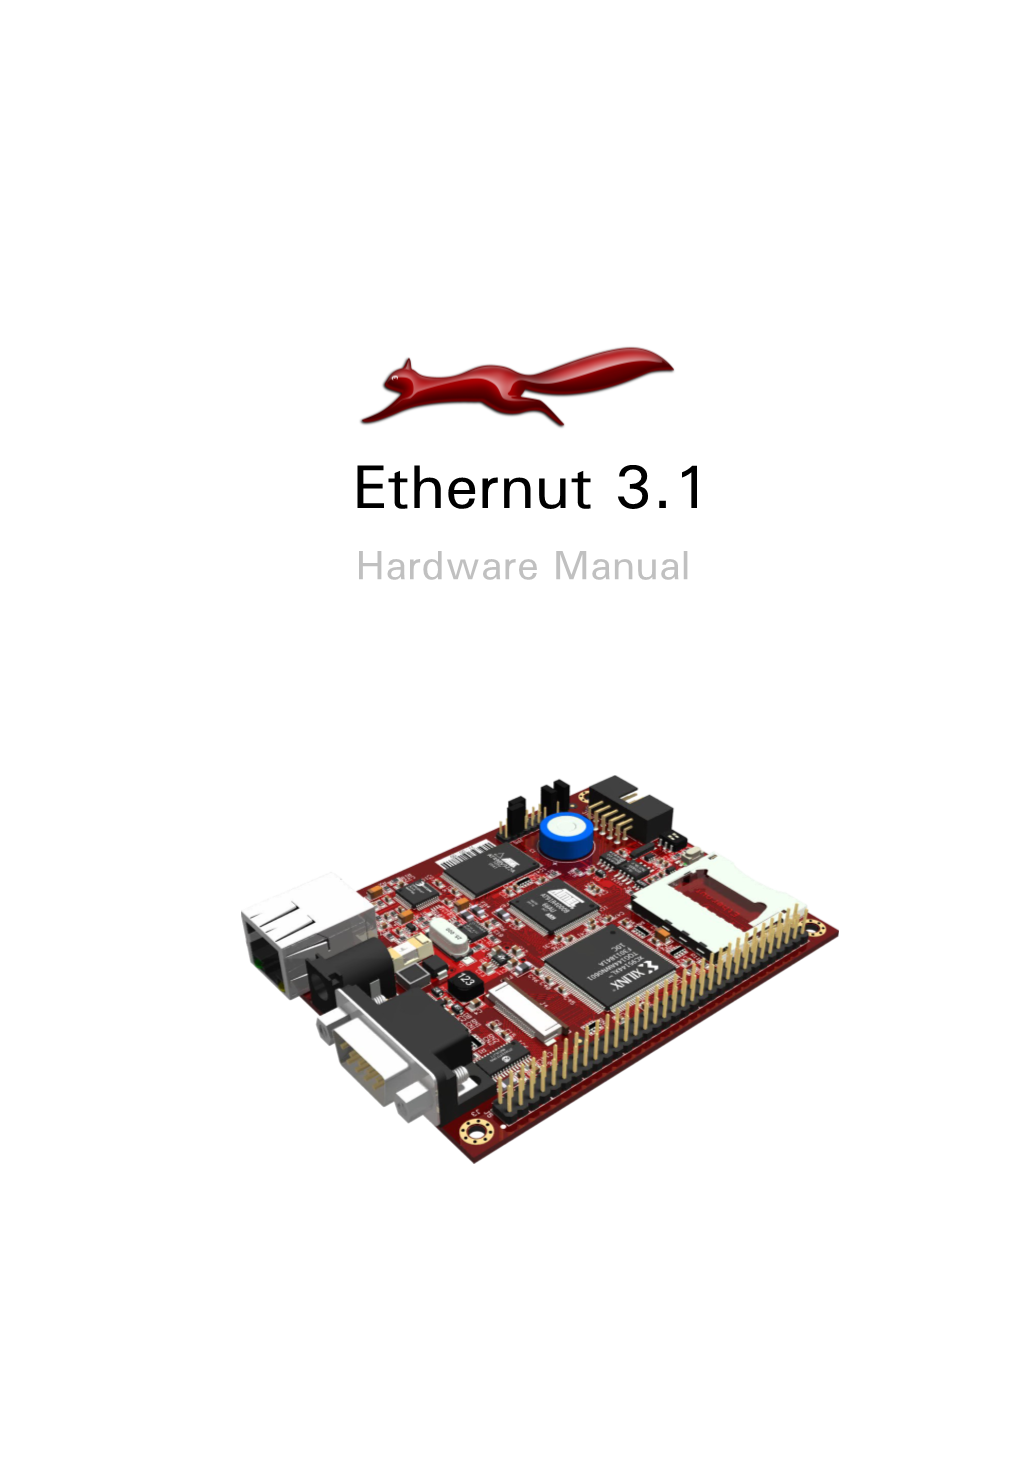 Ethernut 3.1 Hardware Manual Manual Revision: 3.0 Issue Date: November 2009 Copyright 2005-2009 Egnite Gmbh